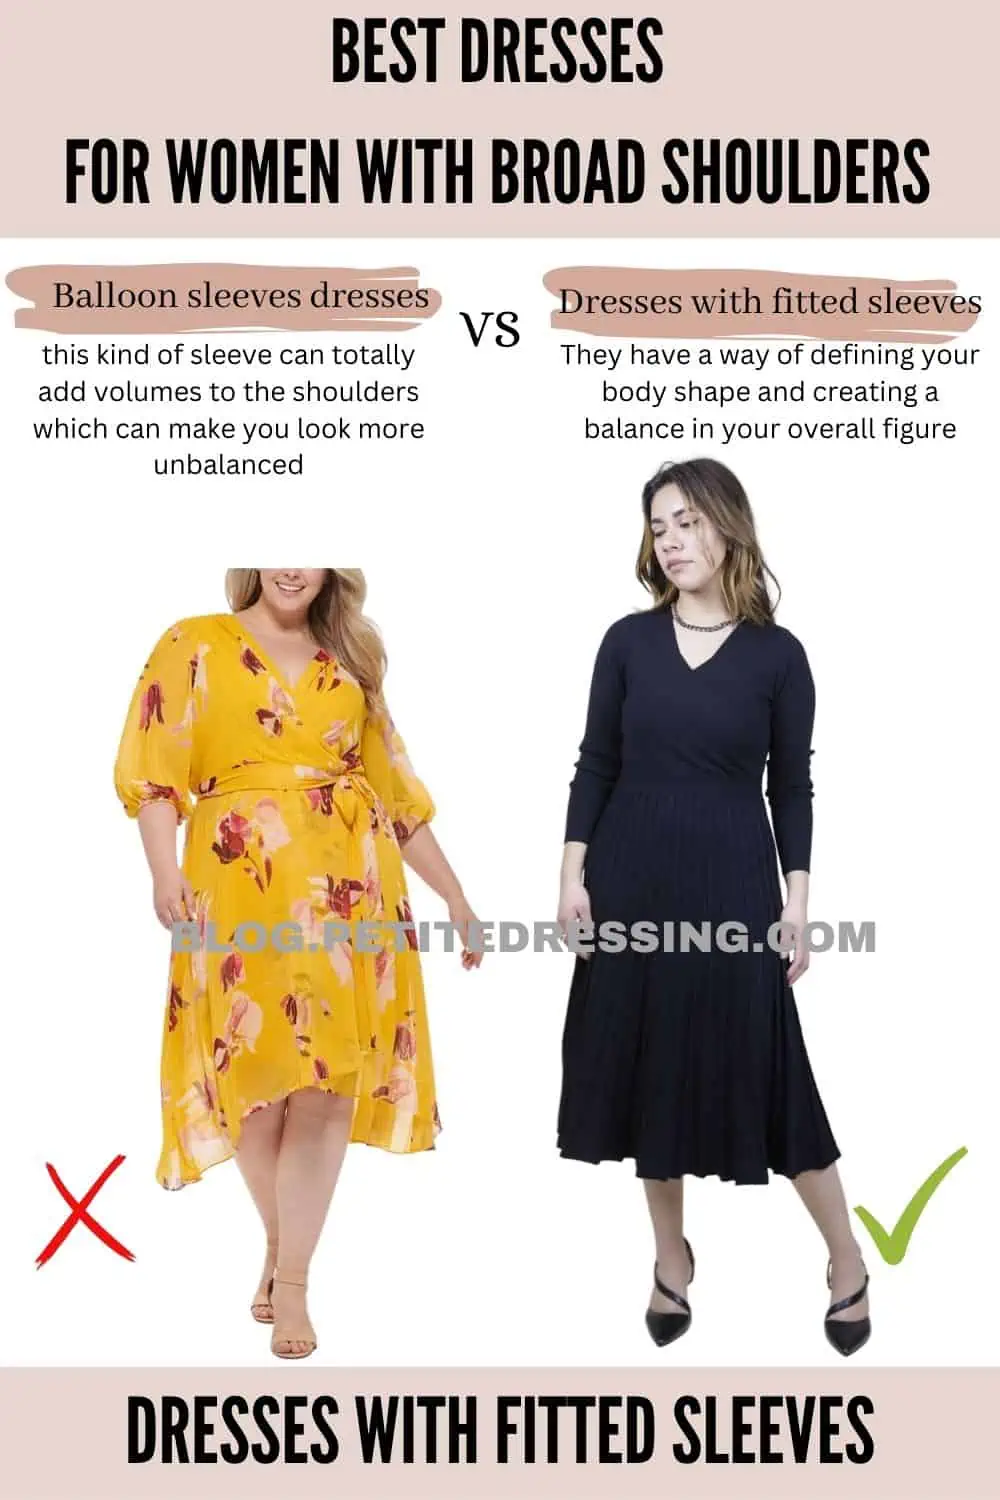 25 Best Dresses for Broad Shoulders: How to Dress Body Type